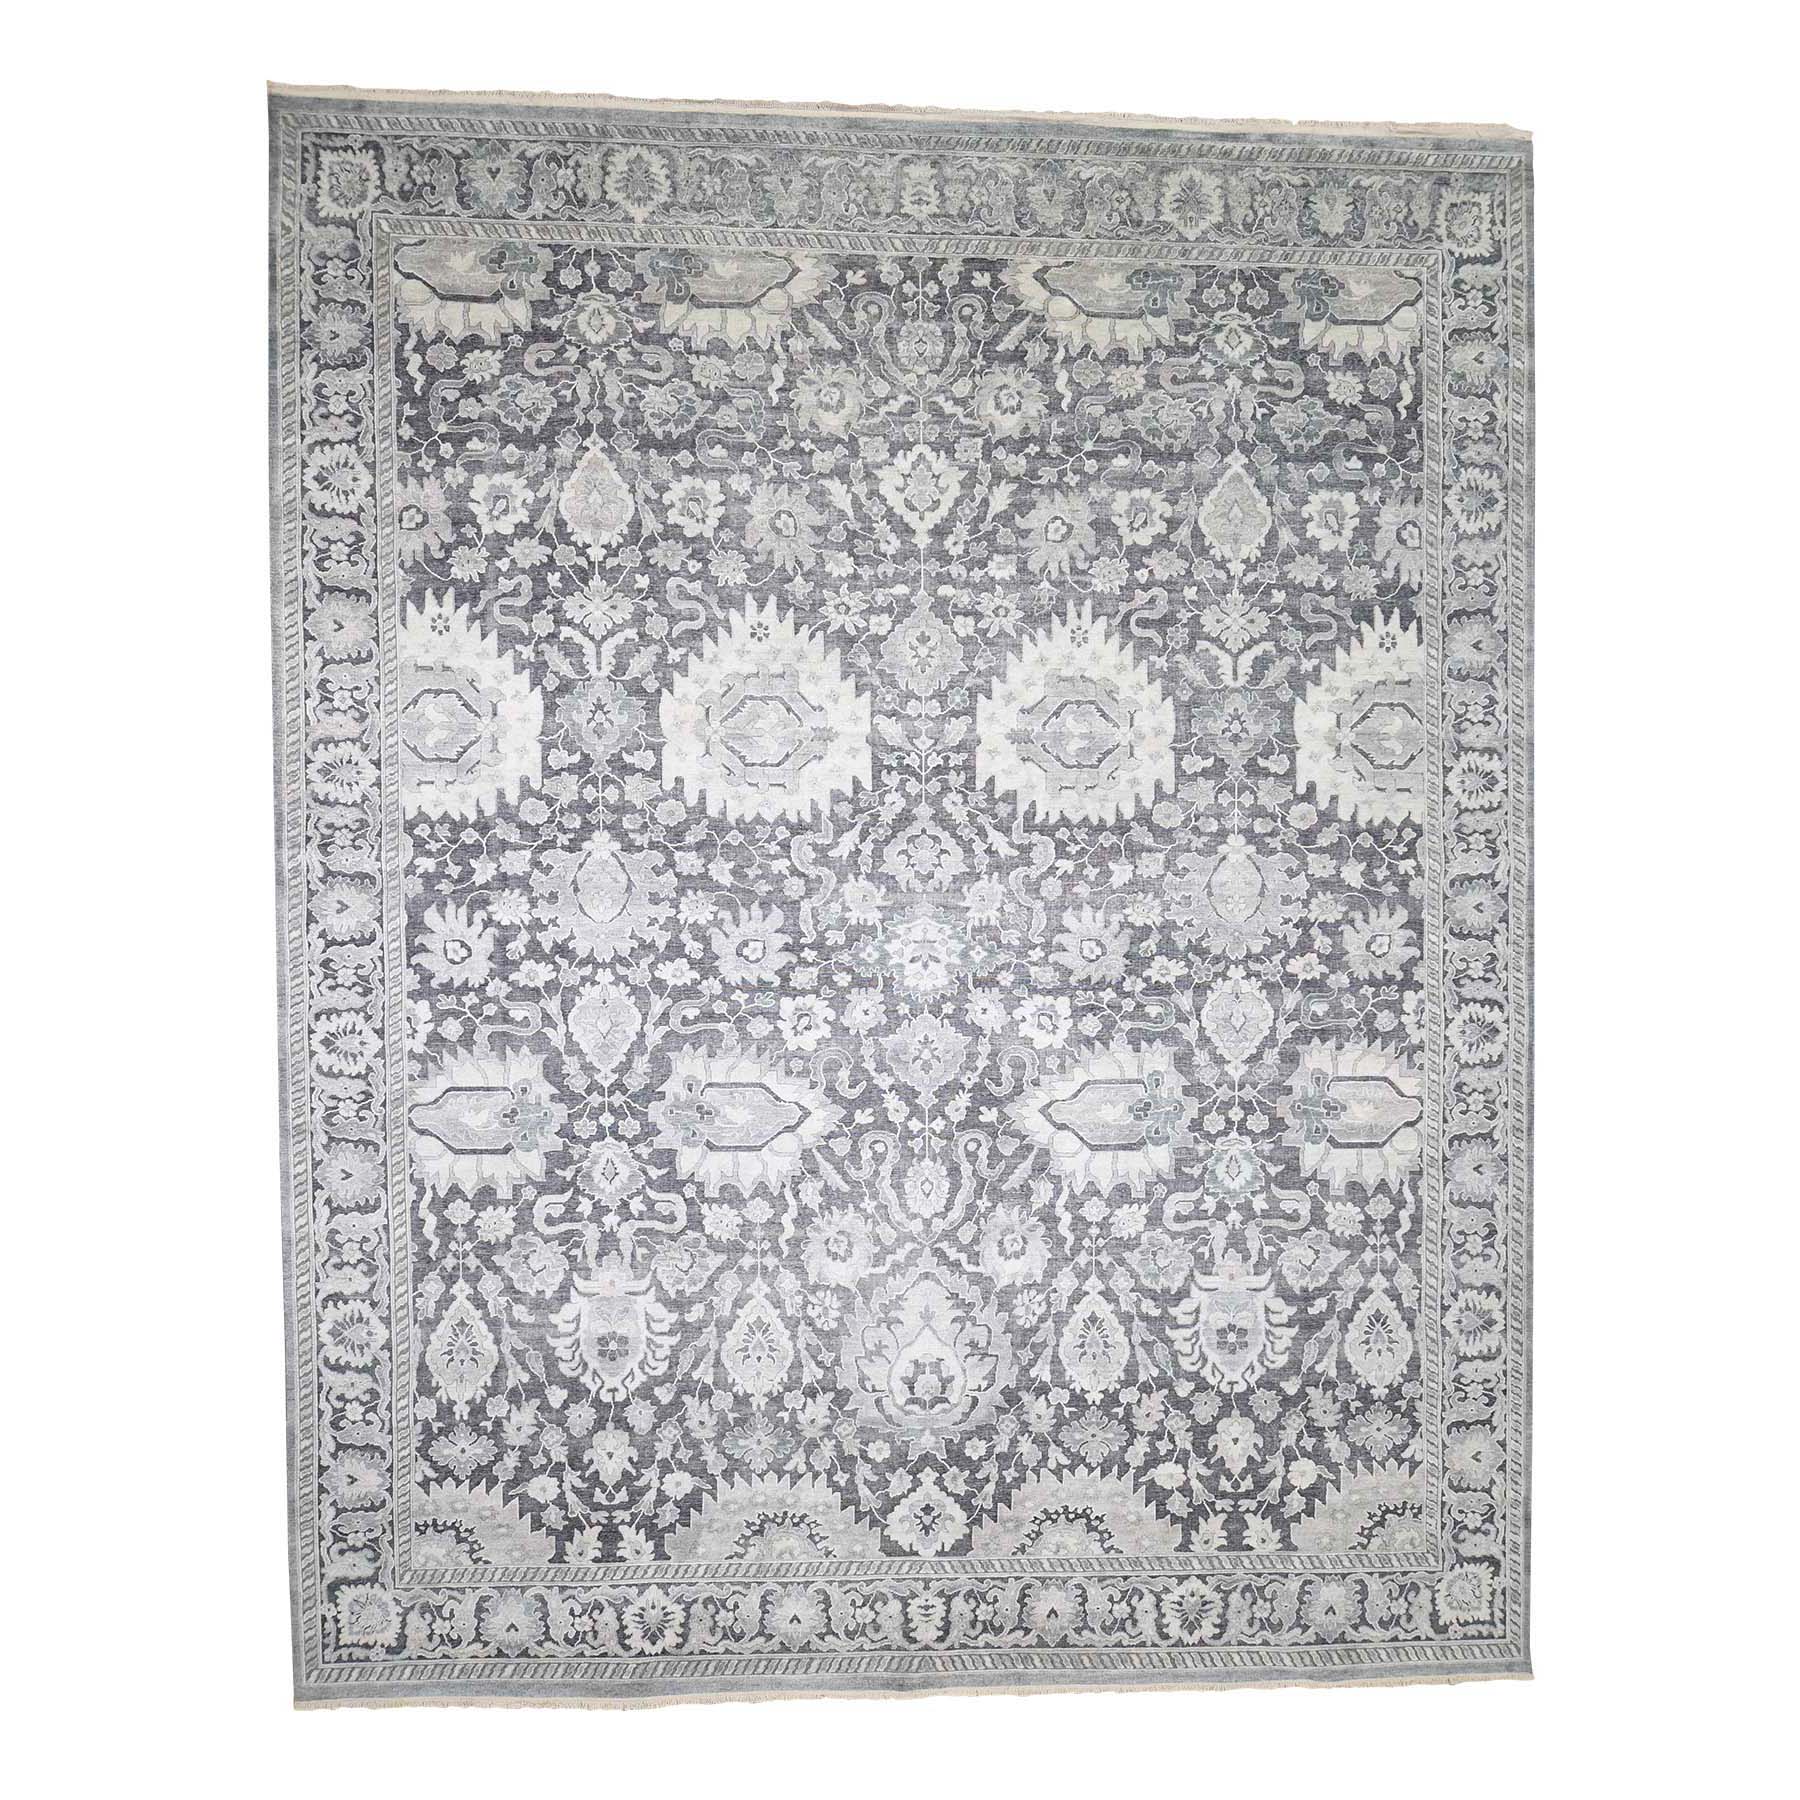 11'10"x14'10" Hand Woven Oushak Influence Silk with Textured Wool Oversized Oriental Rug 